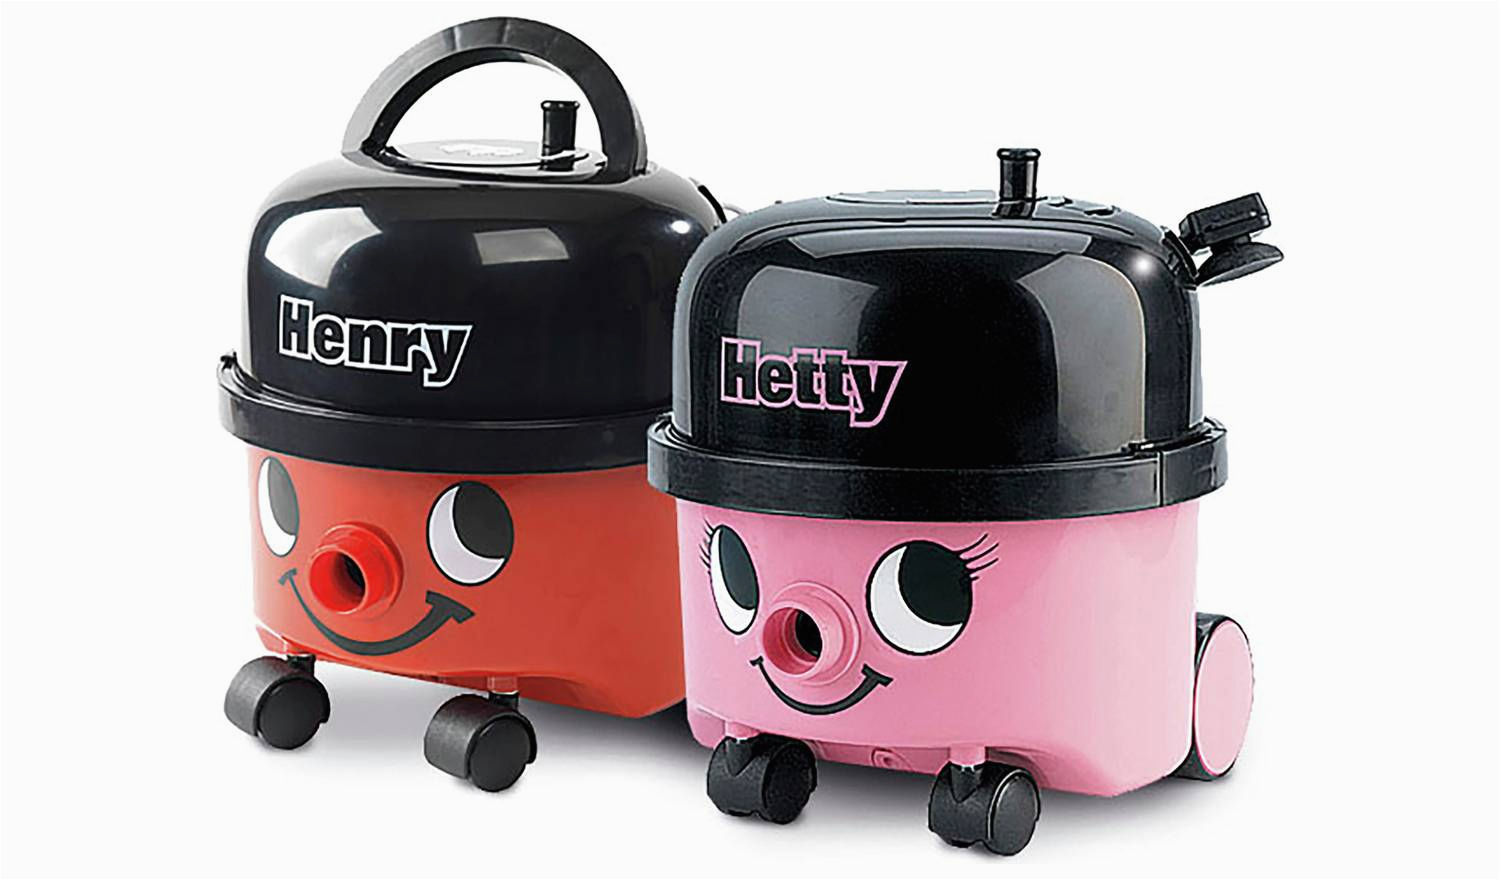 news argos is selling little henry hoover vacuum cleaners for children 20190406